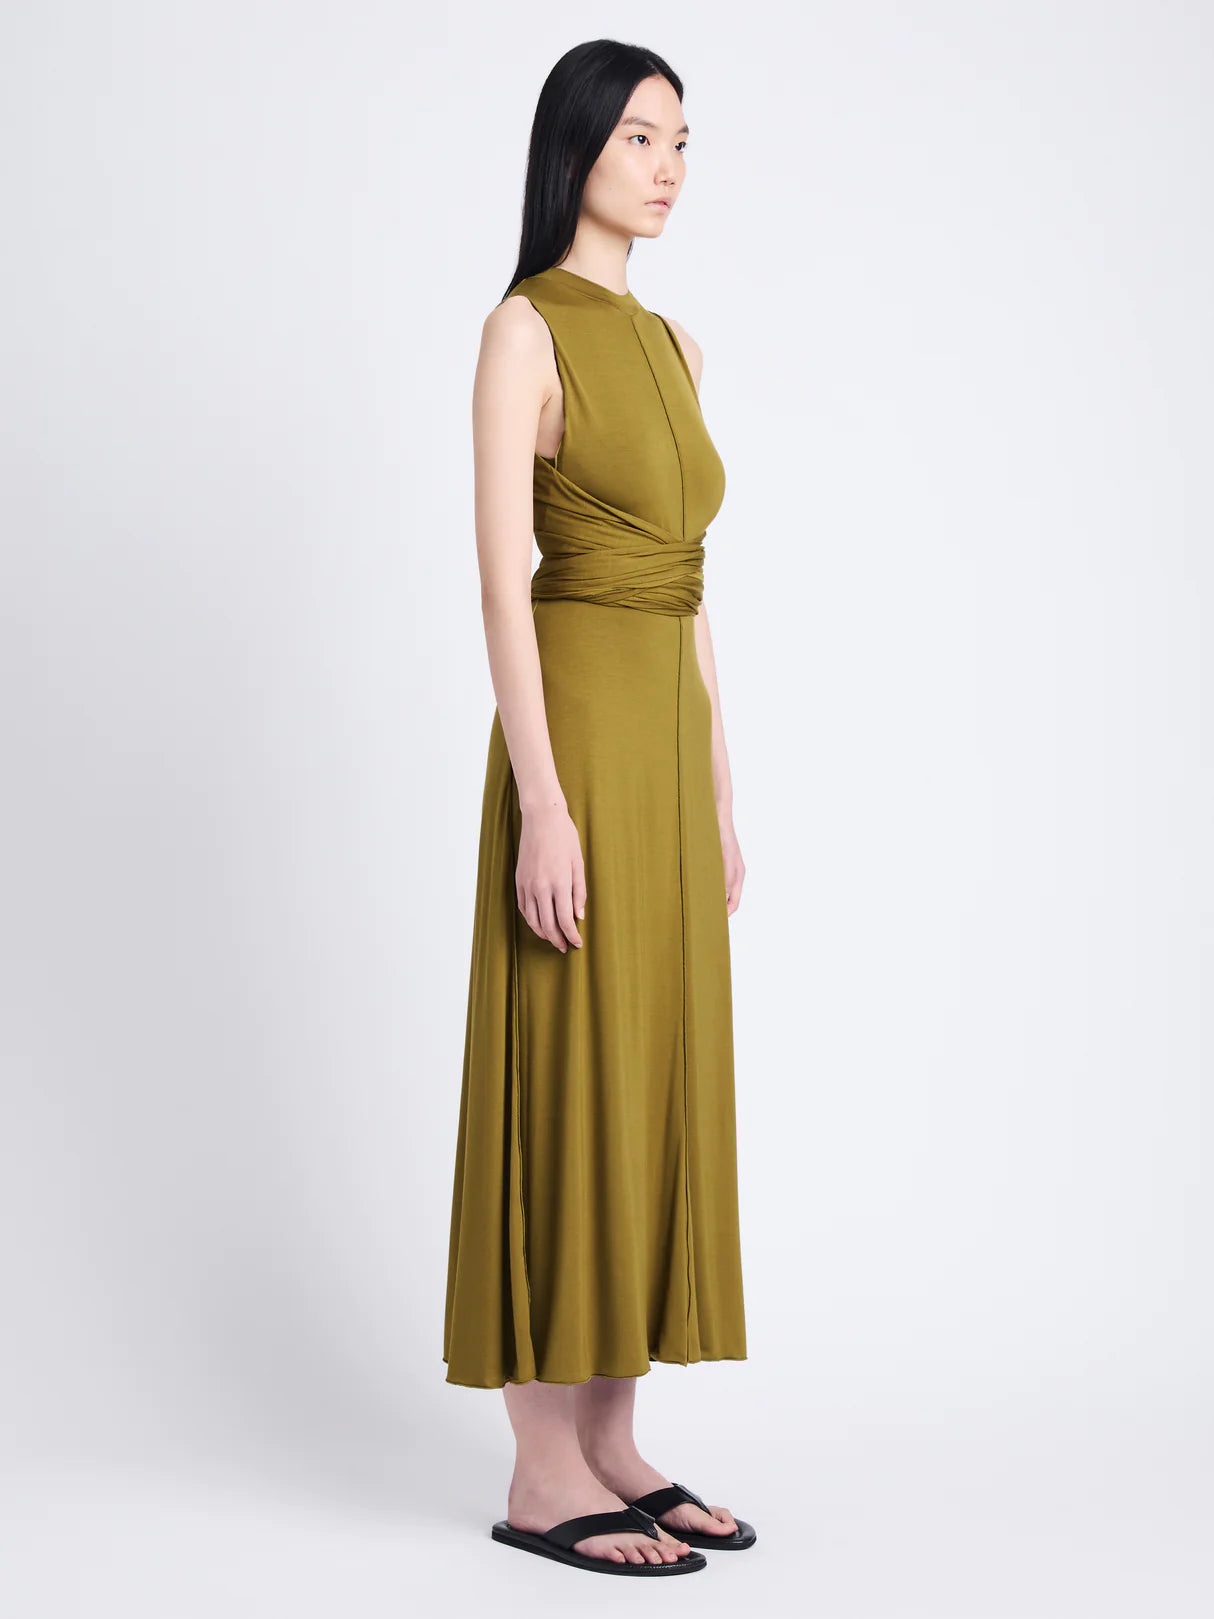 Beatrice Dress in Solid Jersey - More Colors Available